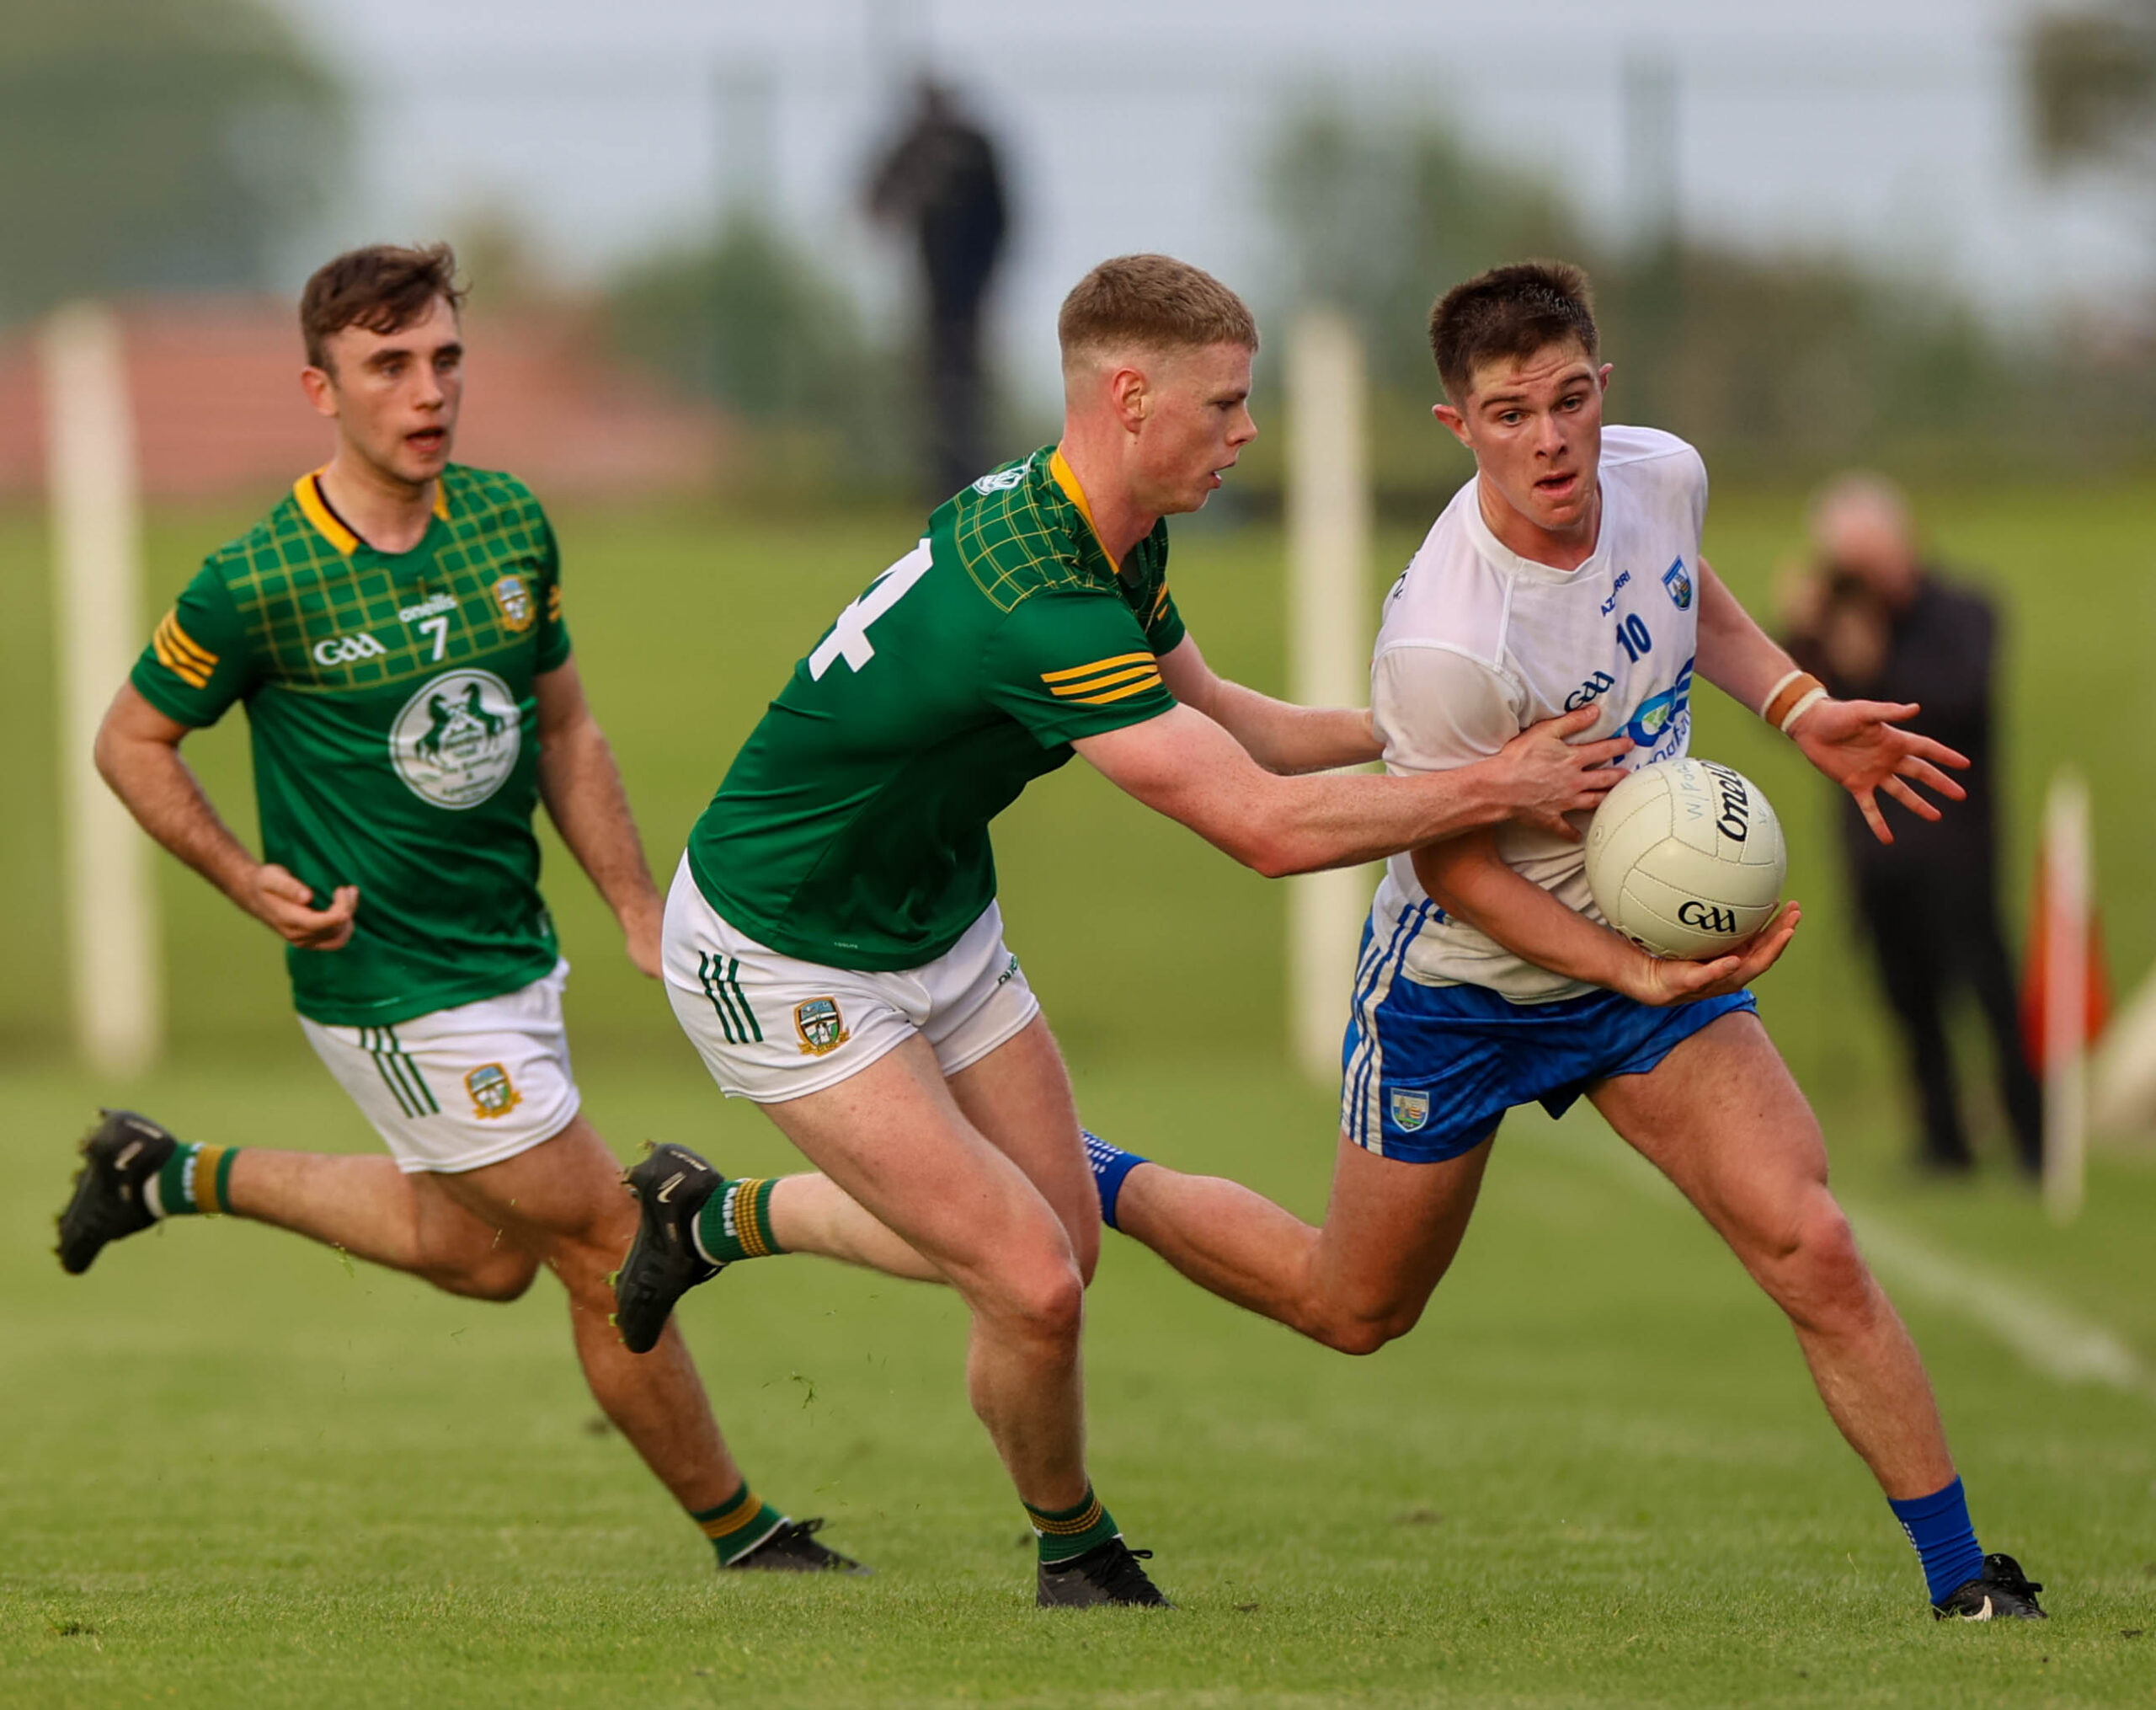 Productive Saturday for County Senior Sides